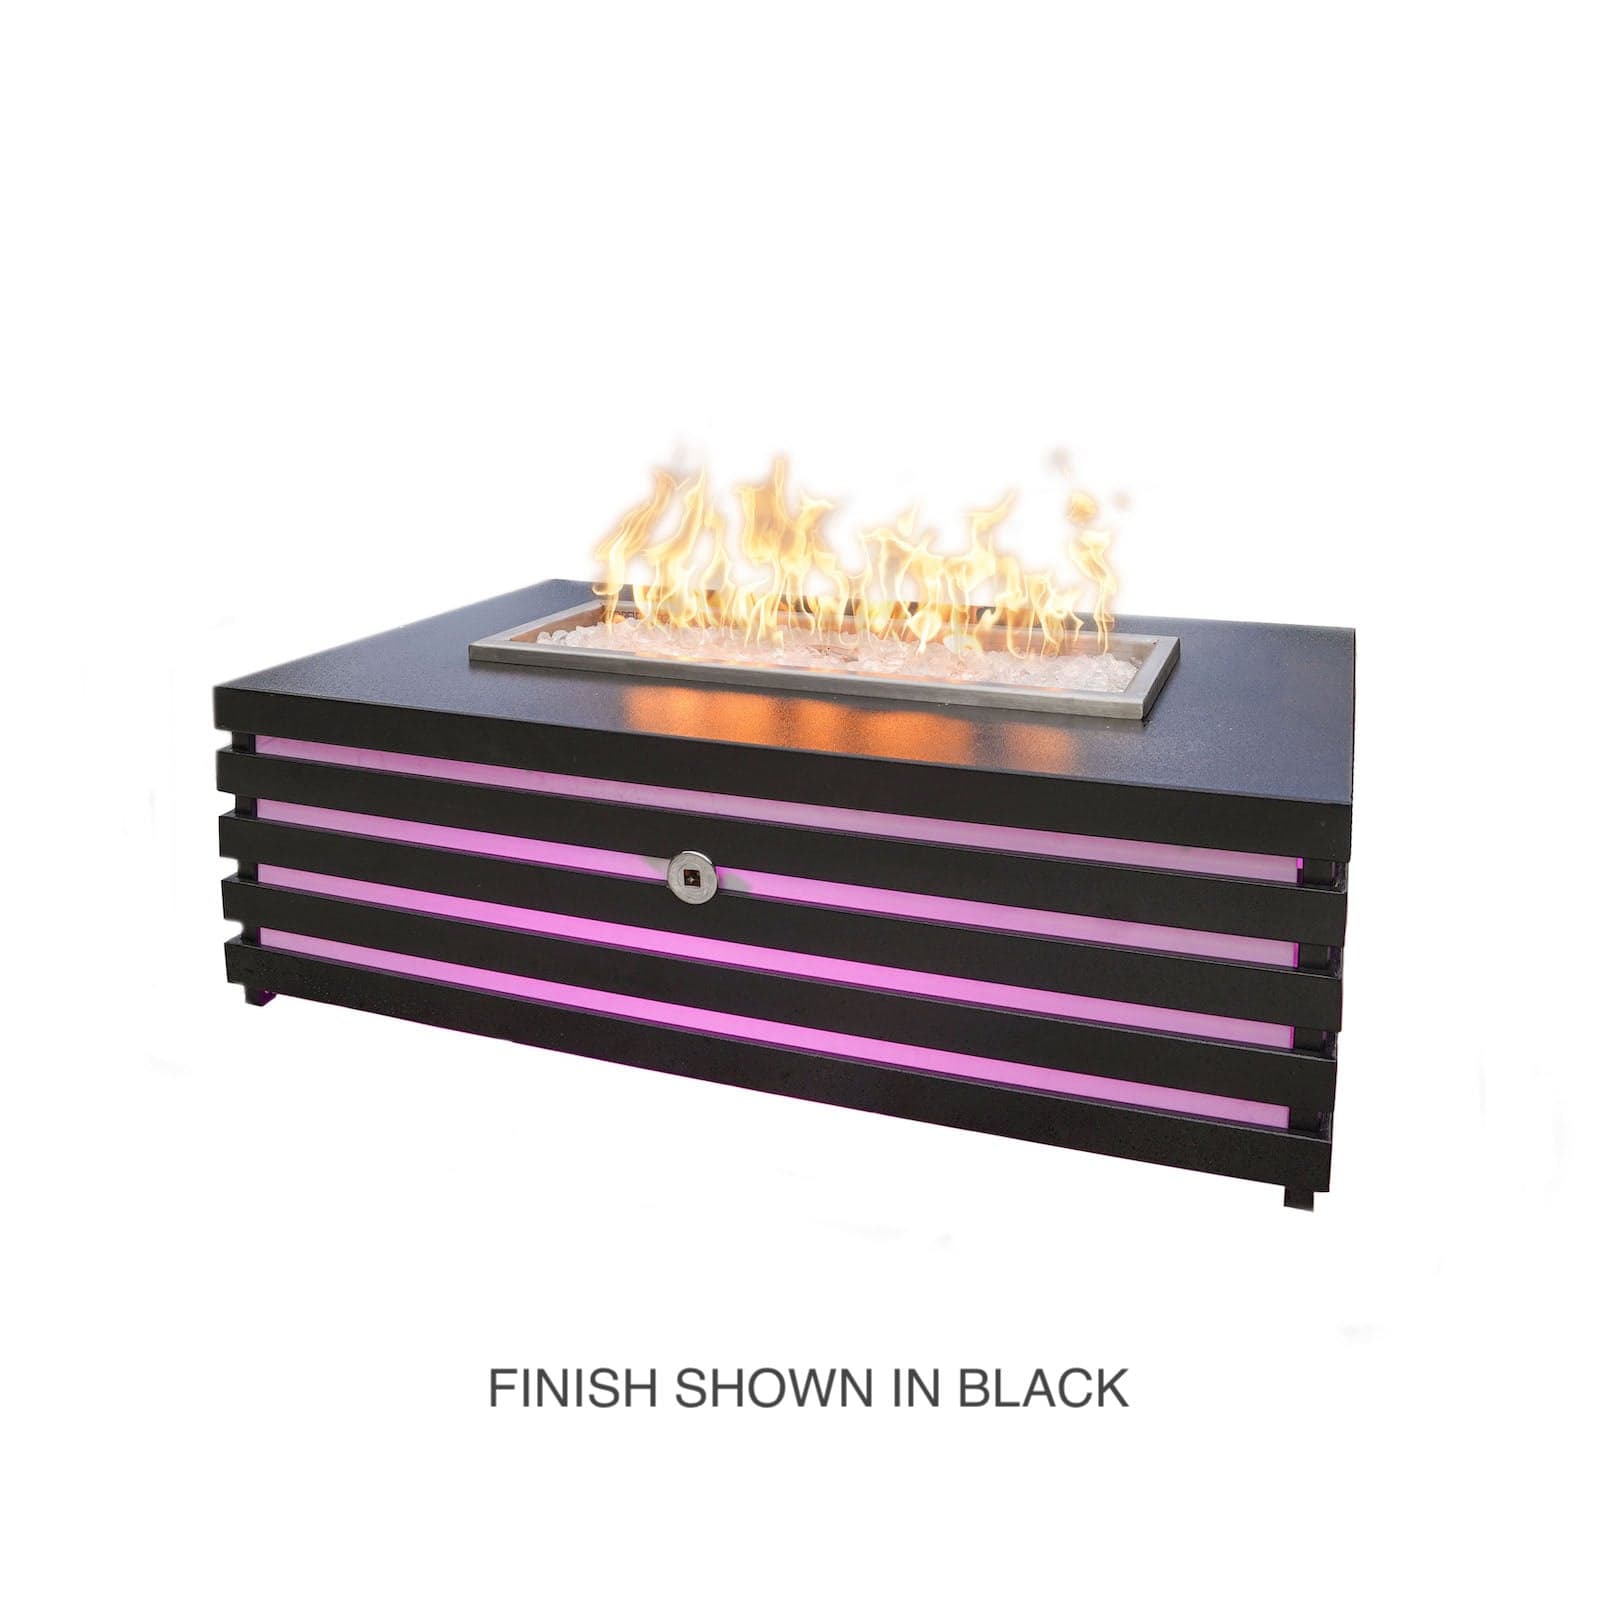 The Outdoor Plus Fire Features The Outdoor Plus 48" Amina Powder Coated Fire Pit / OPT-AMI4824, OPT-AMI4824FSML, OPT-AMI4824FSEN, OPT-AMI4824E12V, OPT-AMI4824EKIT